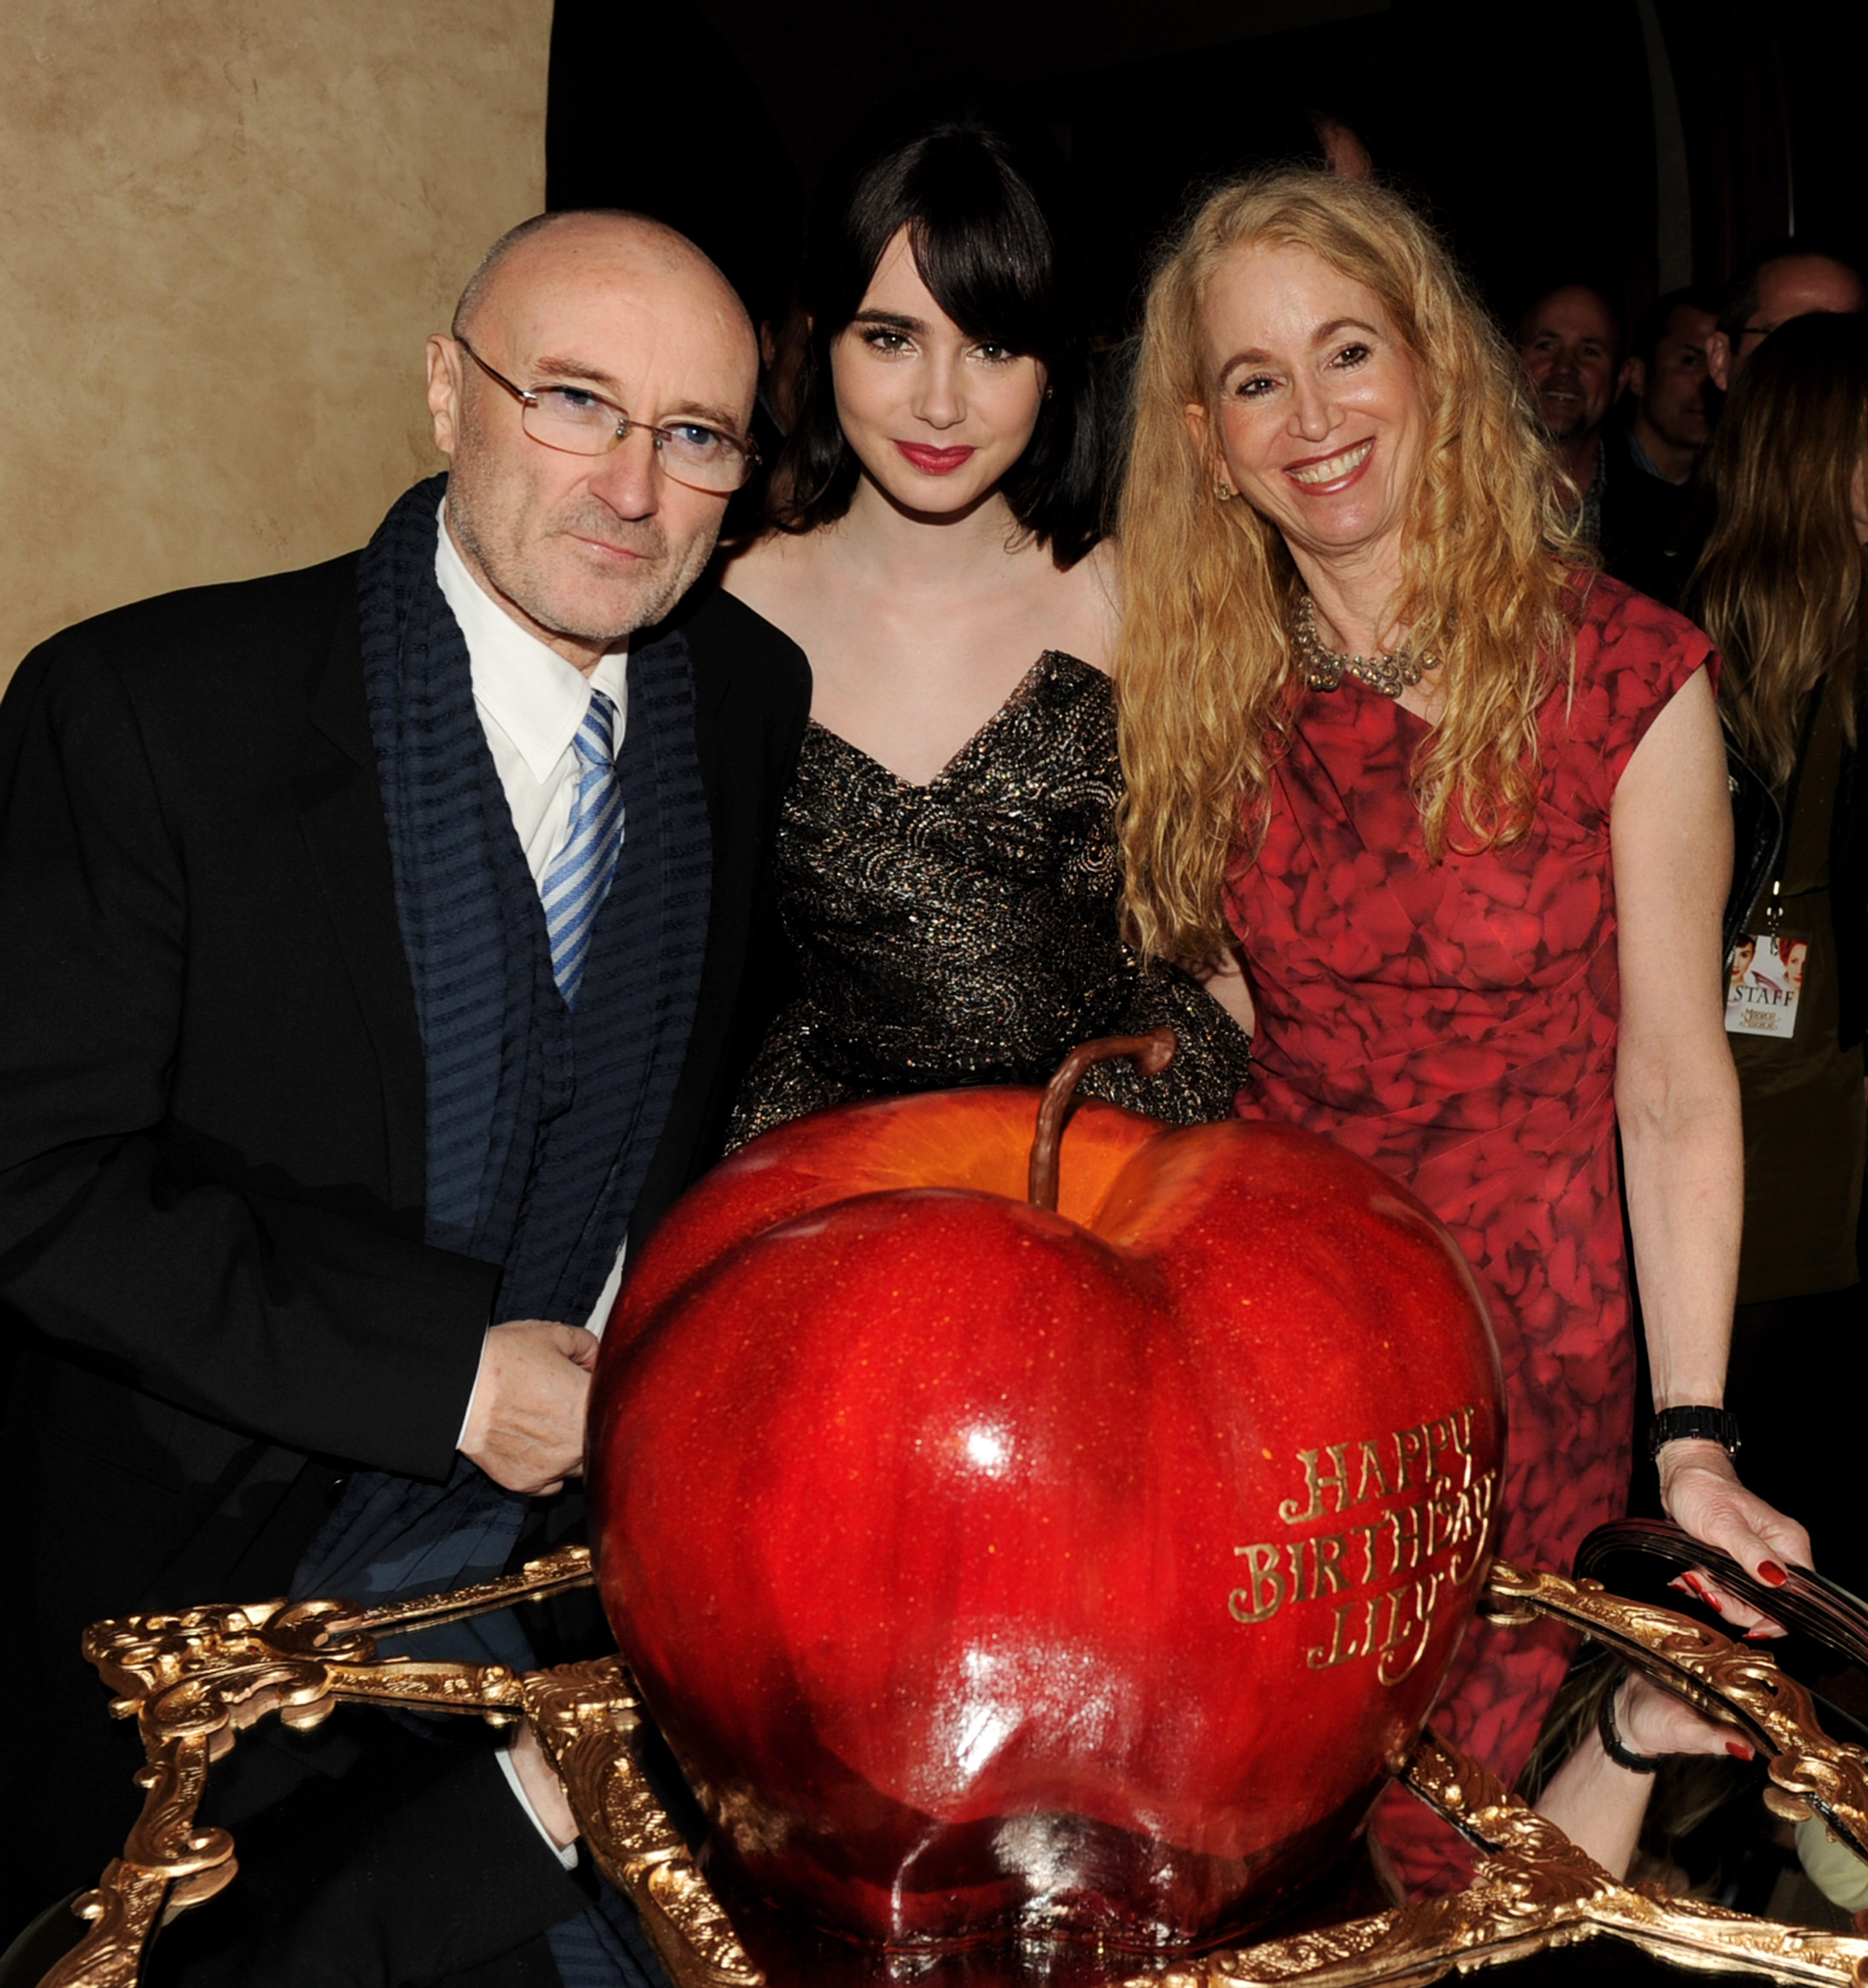 Musician Phil Collins, his daughter actress Lily Collins and her mom Jill Tavelman p at the premiere of Relativity Media's "Mirror Mirror" at the Chinese Theater on March 17, 2012 in Los Angeles, California.